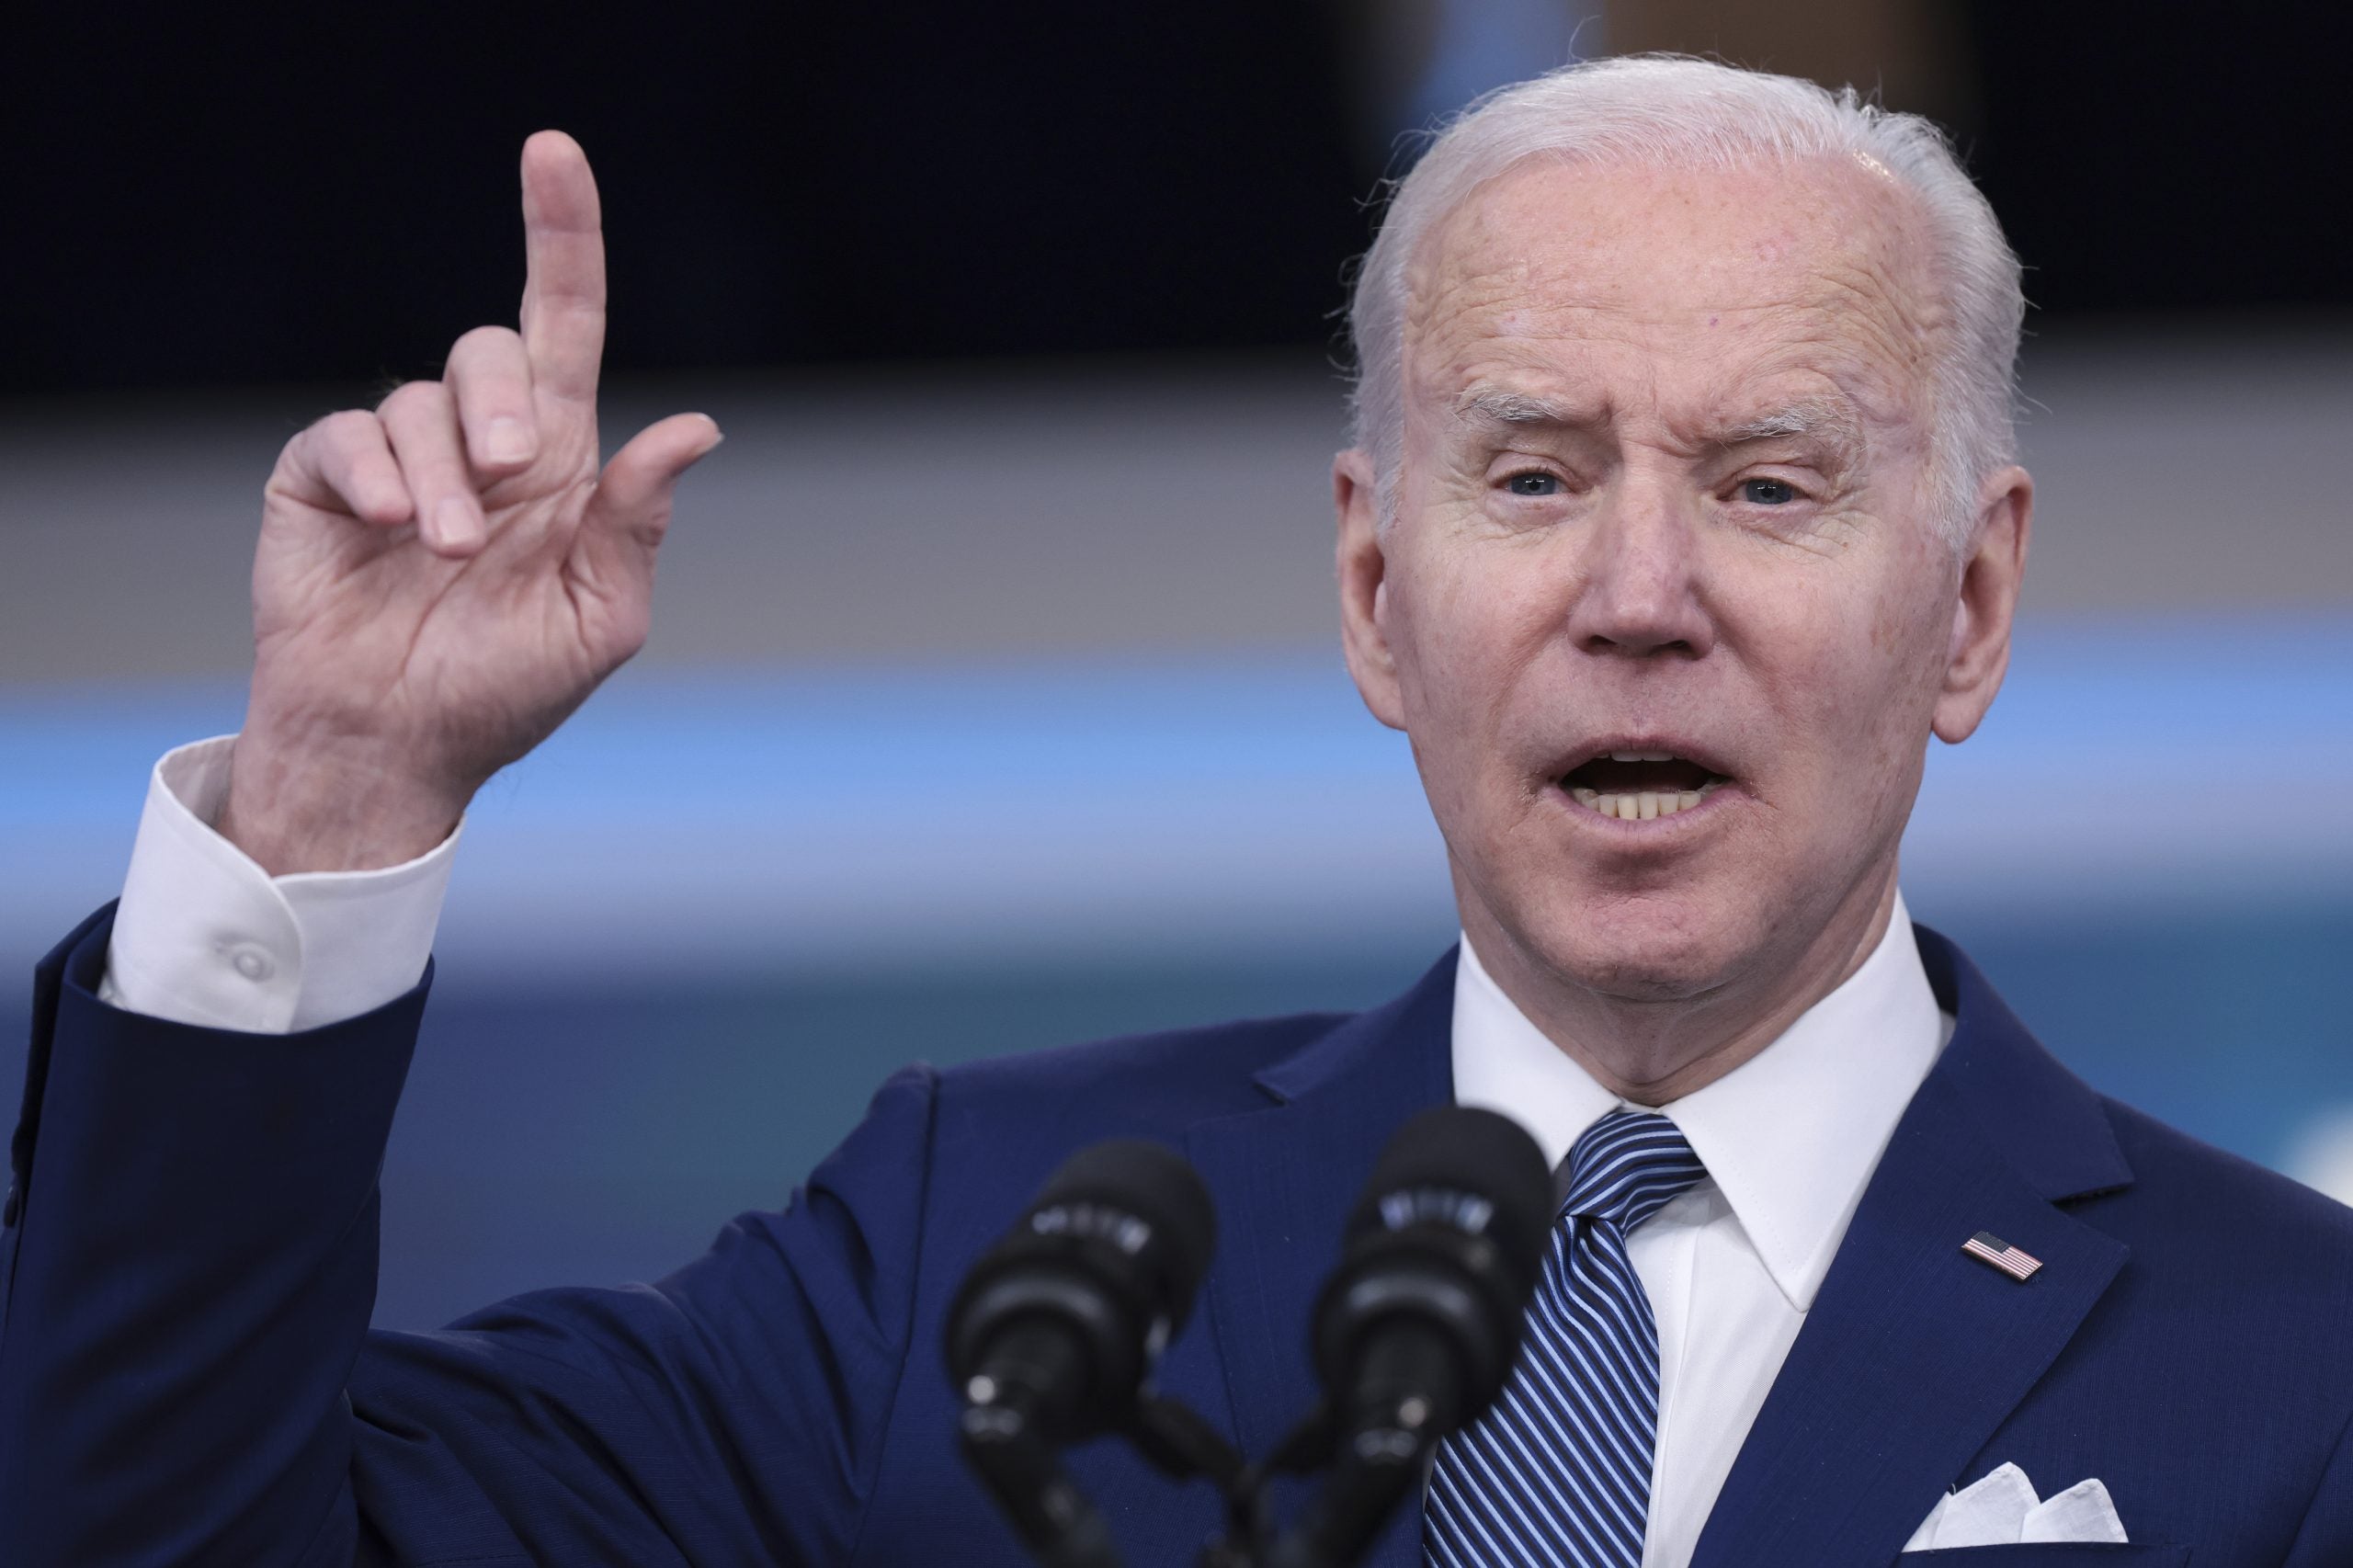 President Biden Urges Return To Office: 'Most Americans Can Remove Their Masks, Return To Work And Move Forward Safely'